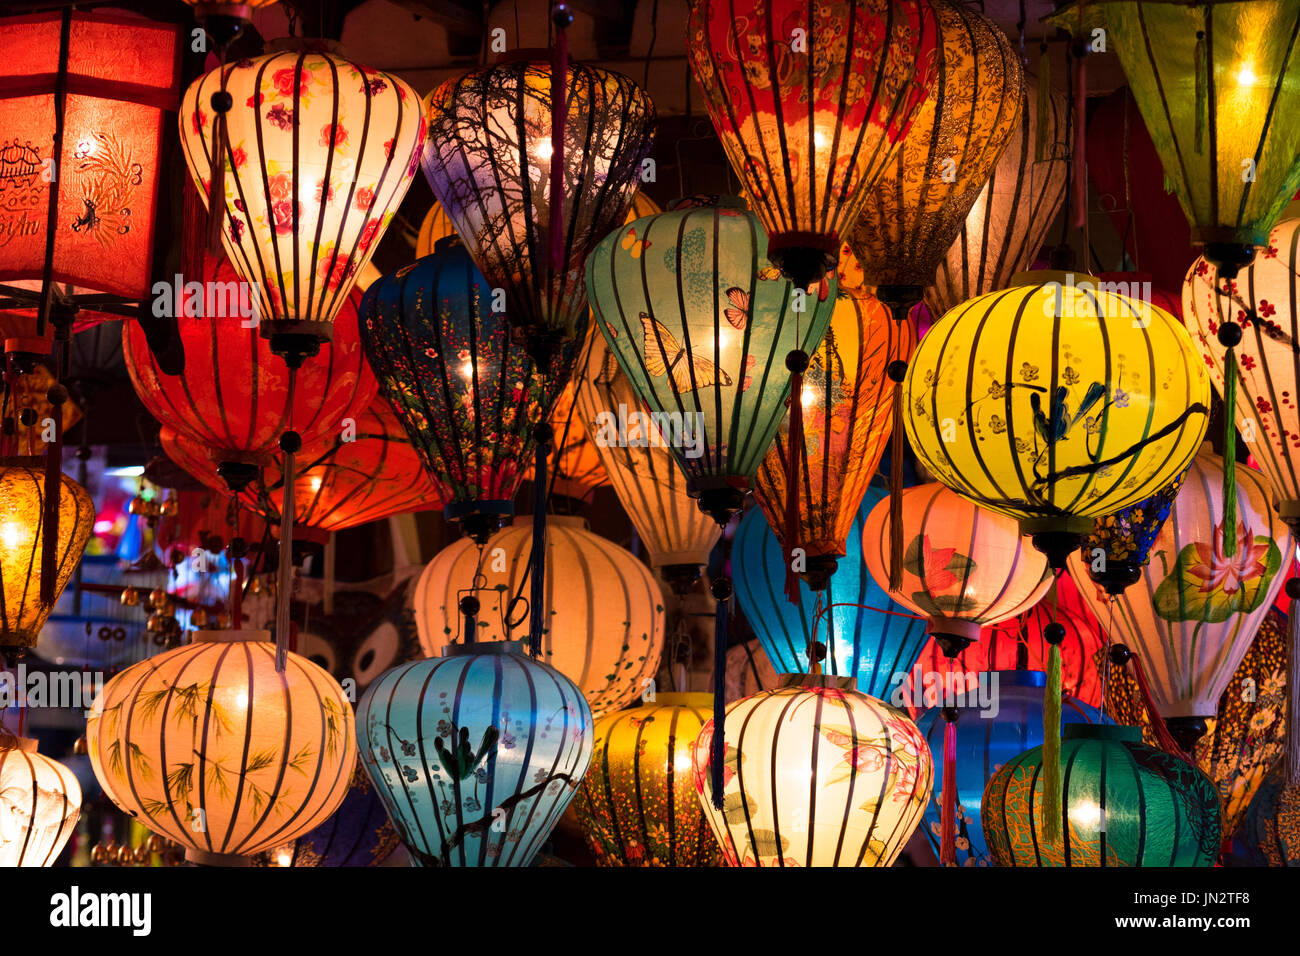 Many silk lanterns of various colors and designs hanging from a shop at night in Hoi An, Vietnam Stock Photo